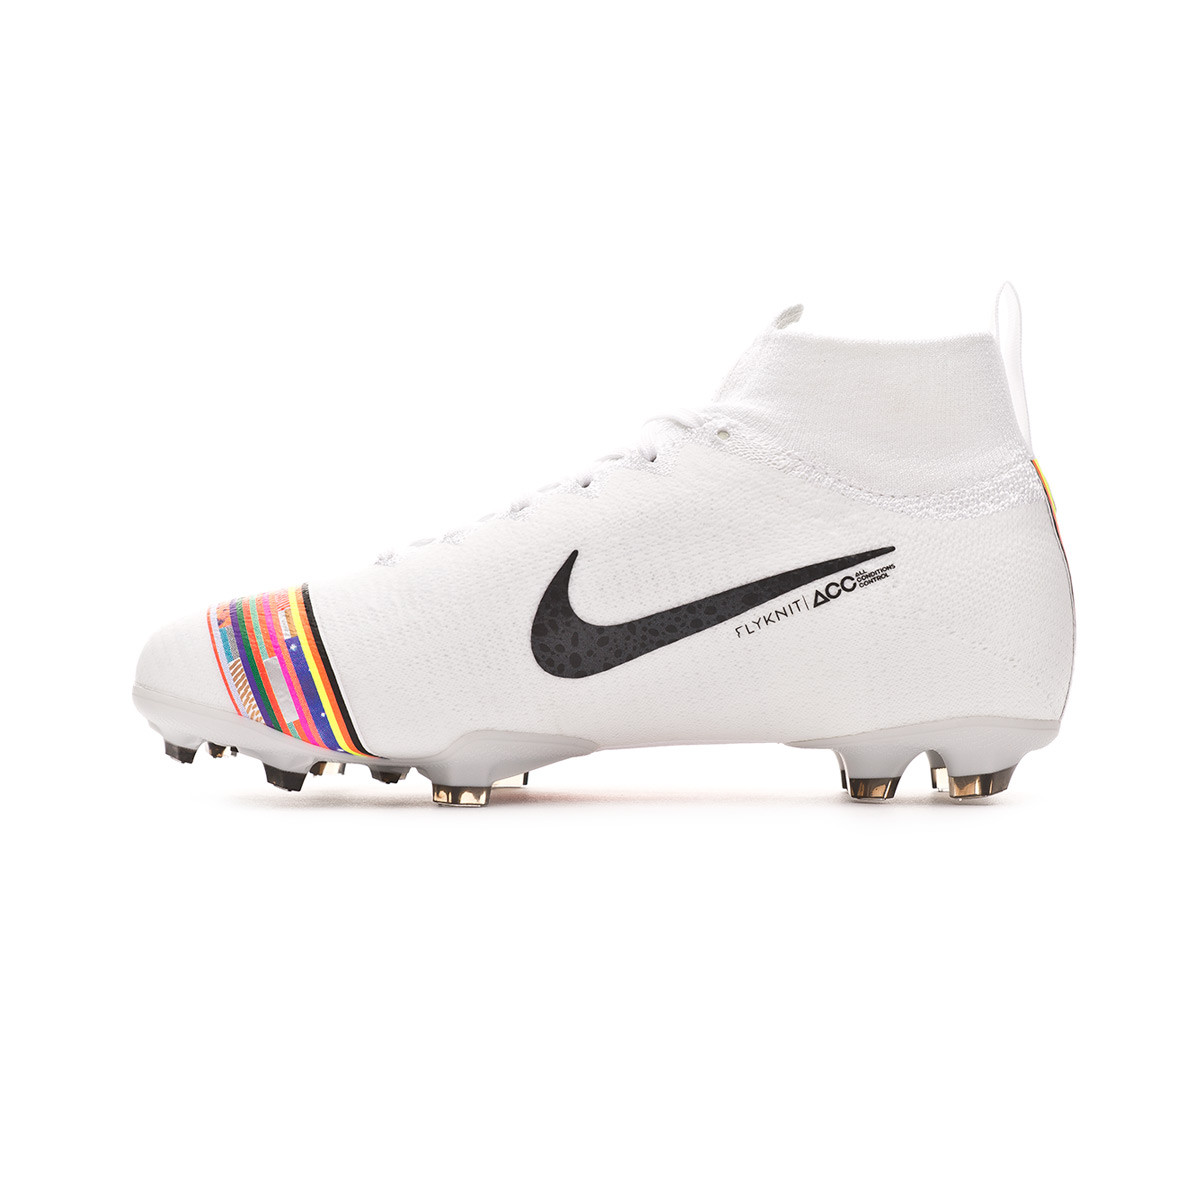 white rainbow original soccer cleats mercurial superfly